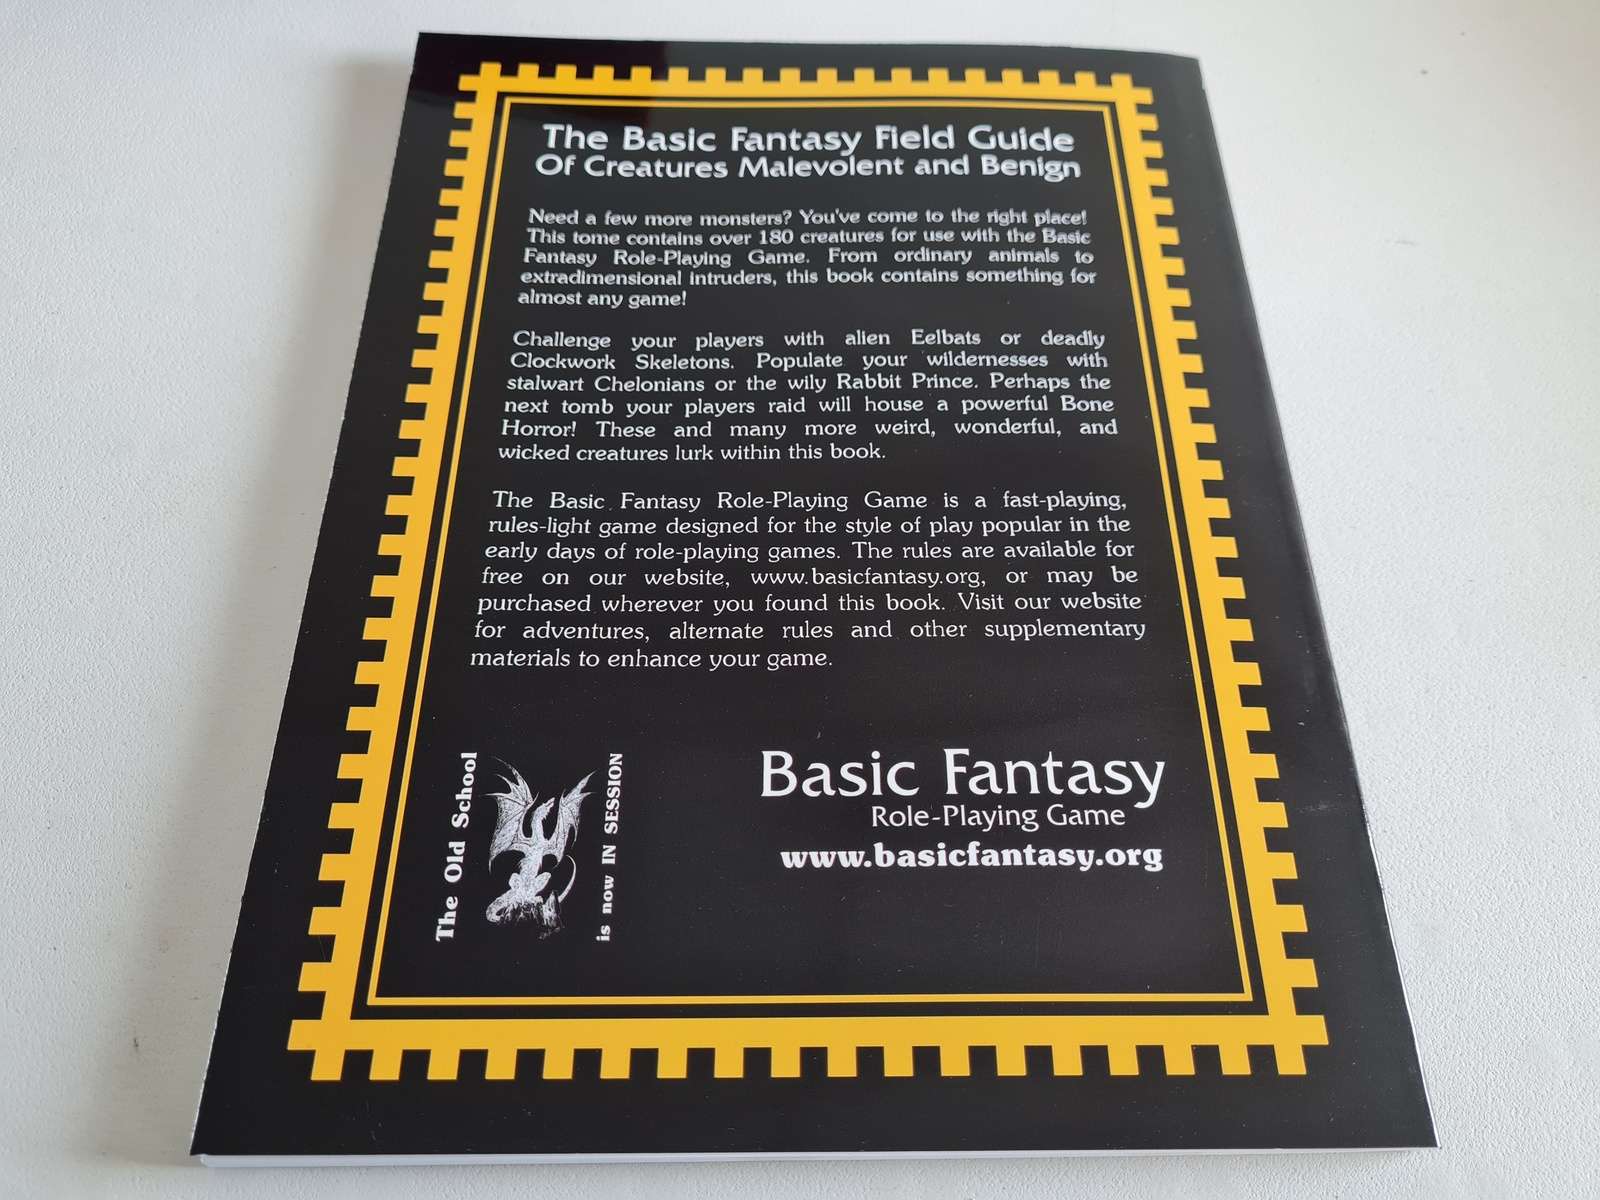 Basic Fantasy Roleplaying Game - Field Guide of Creatures Malevolent and Benign